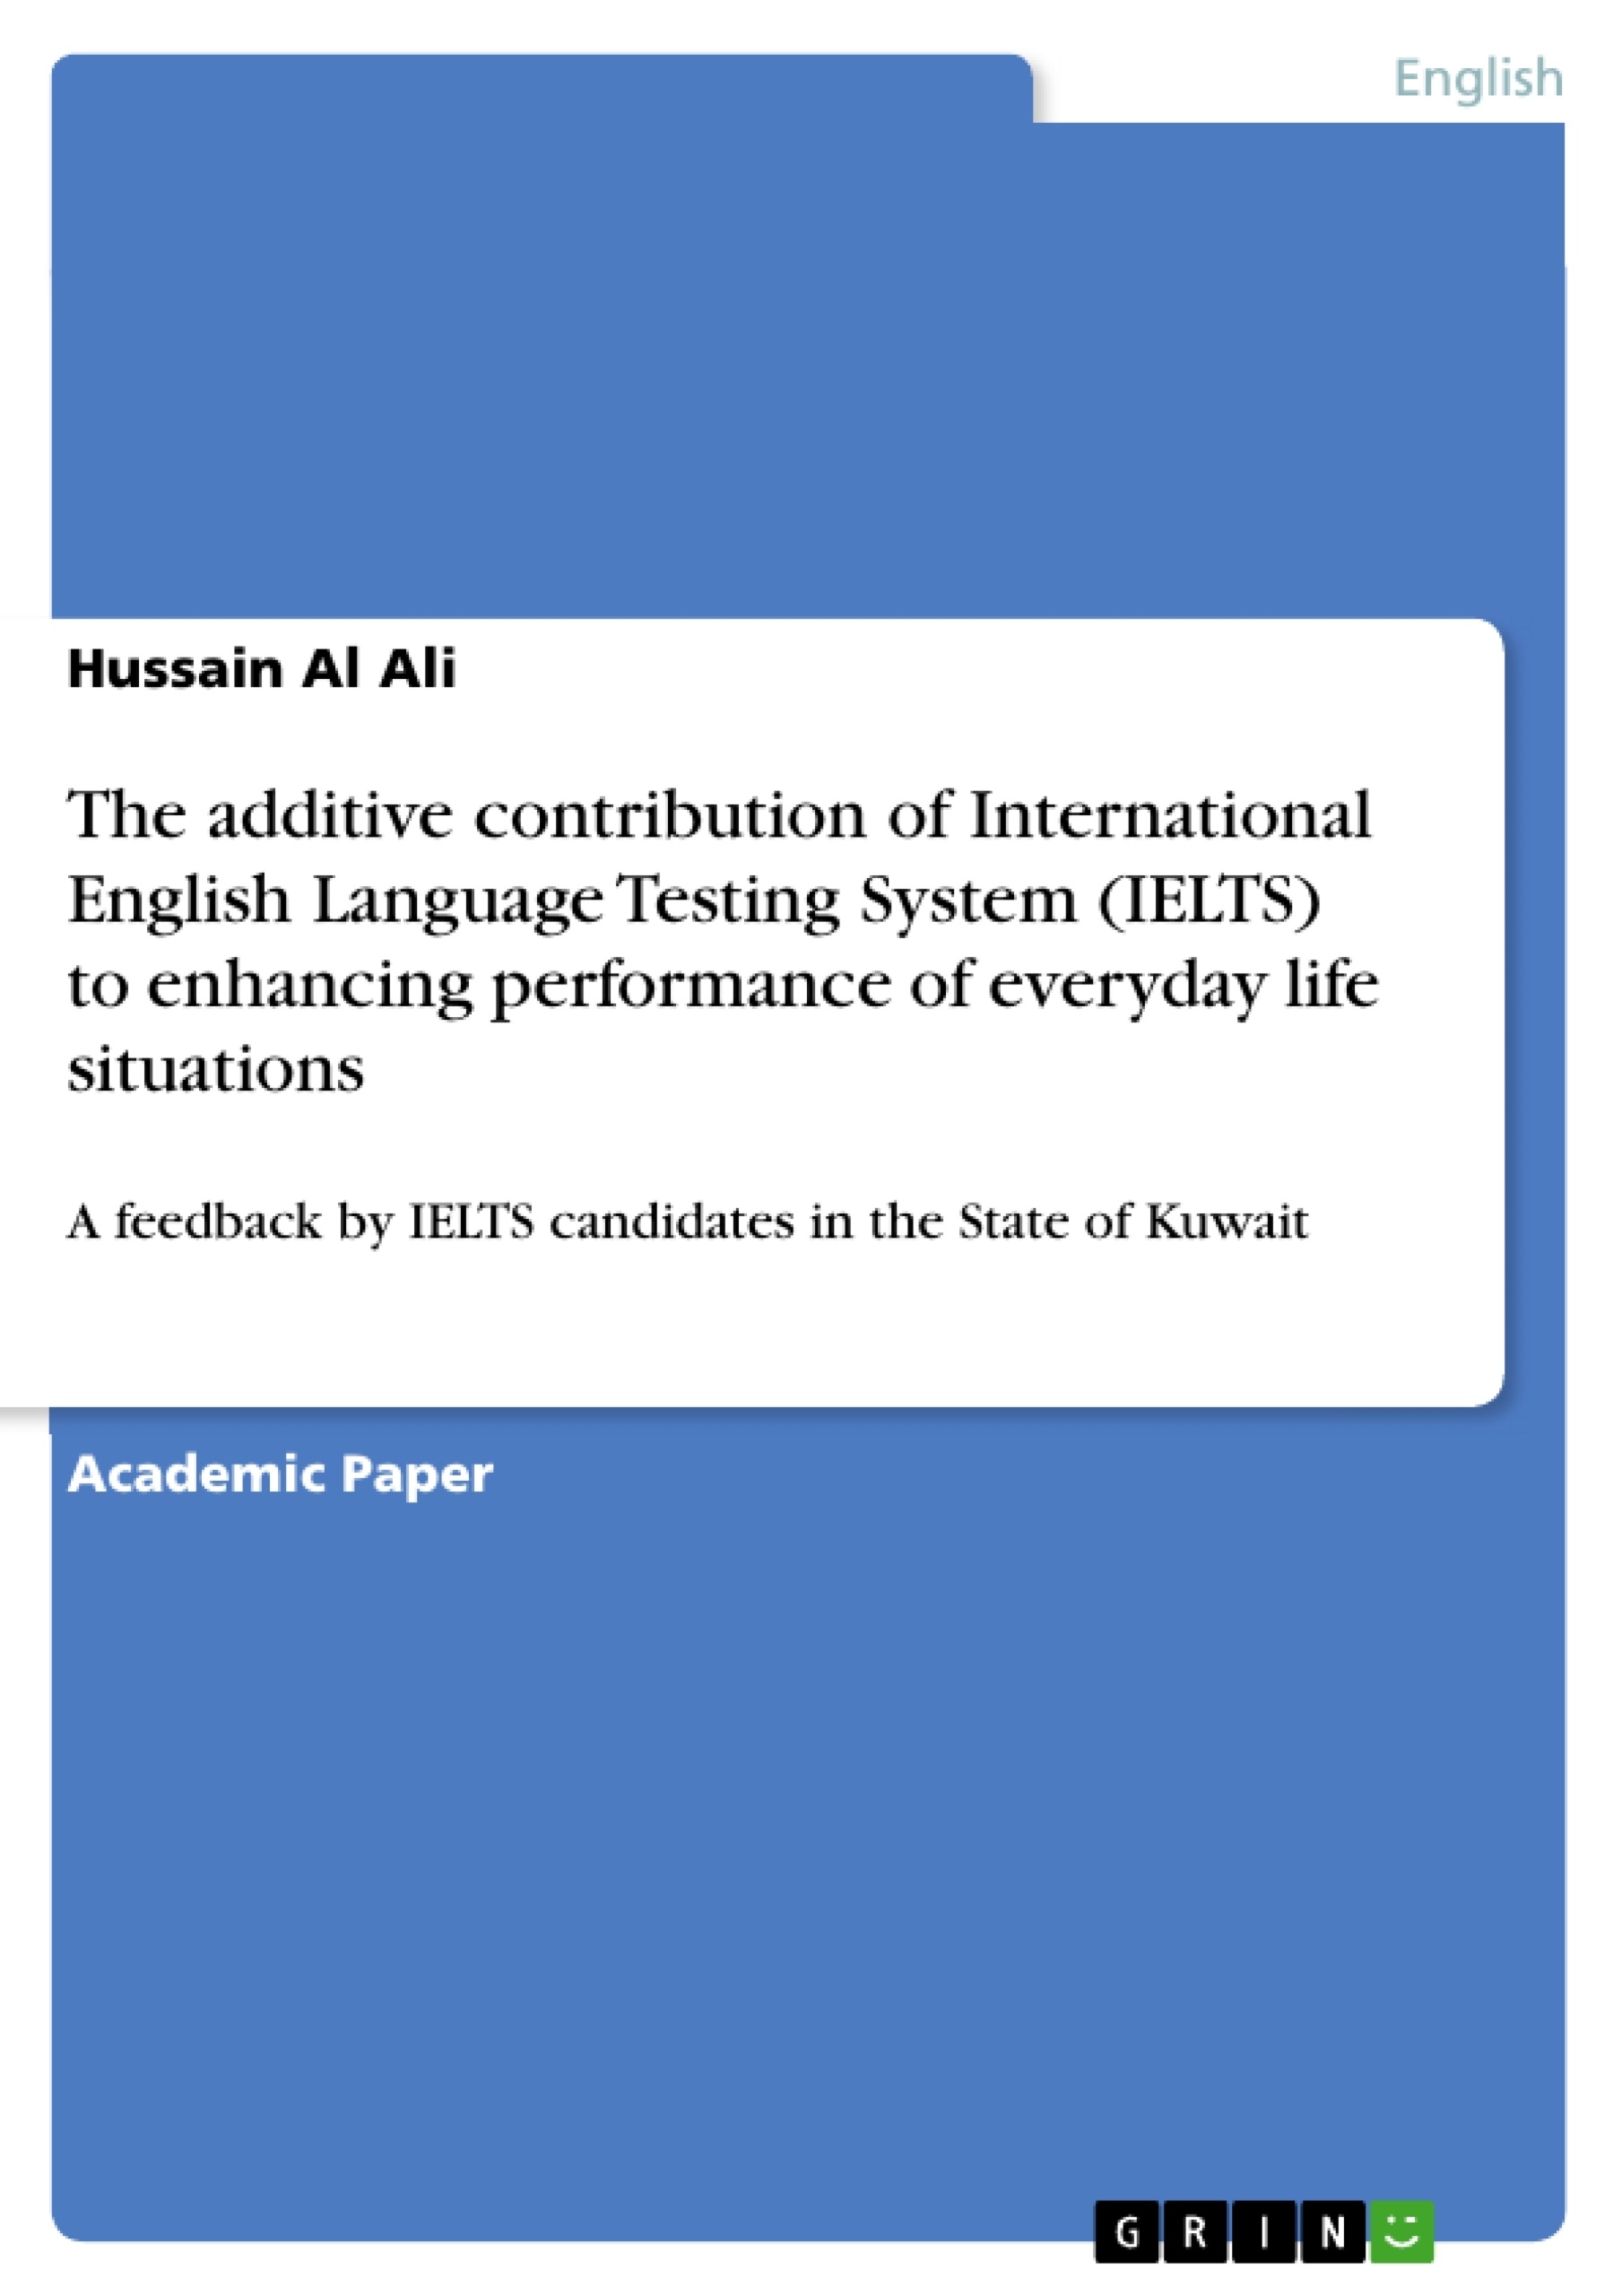 Title: The additive contribution of International English Language Testing System (IELTS) to enhancing performance of everyday life situations